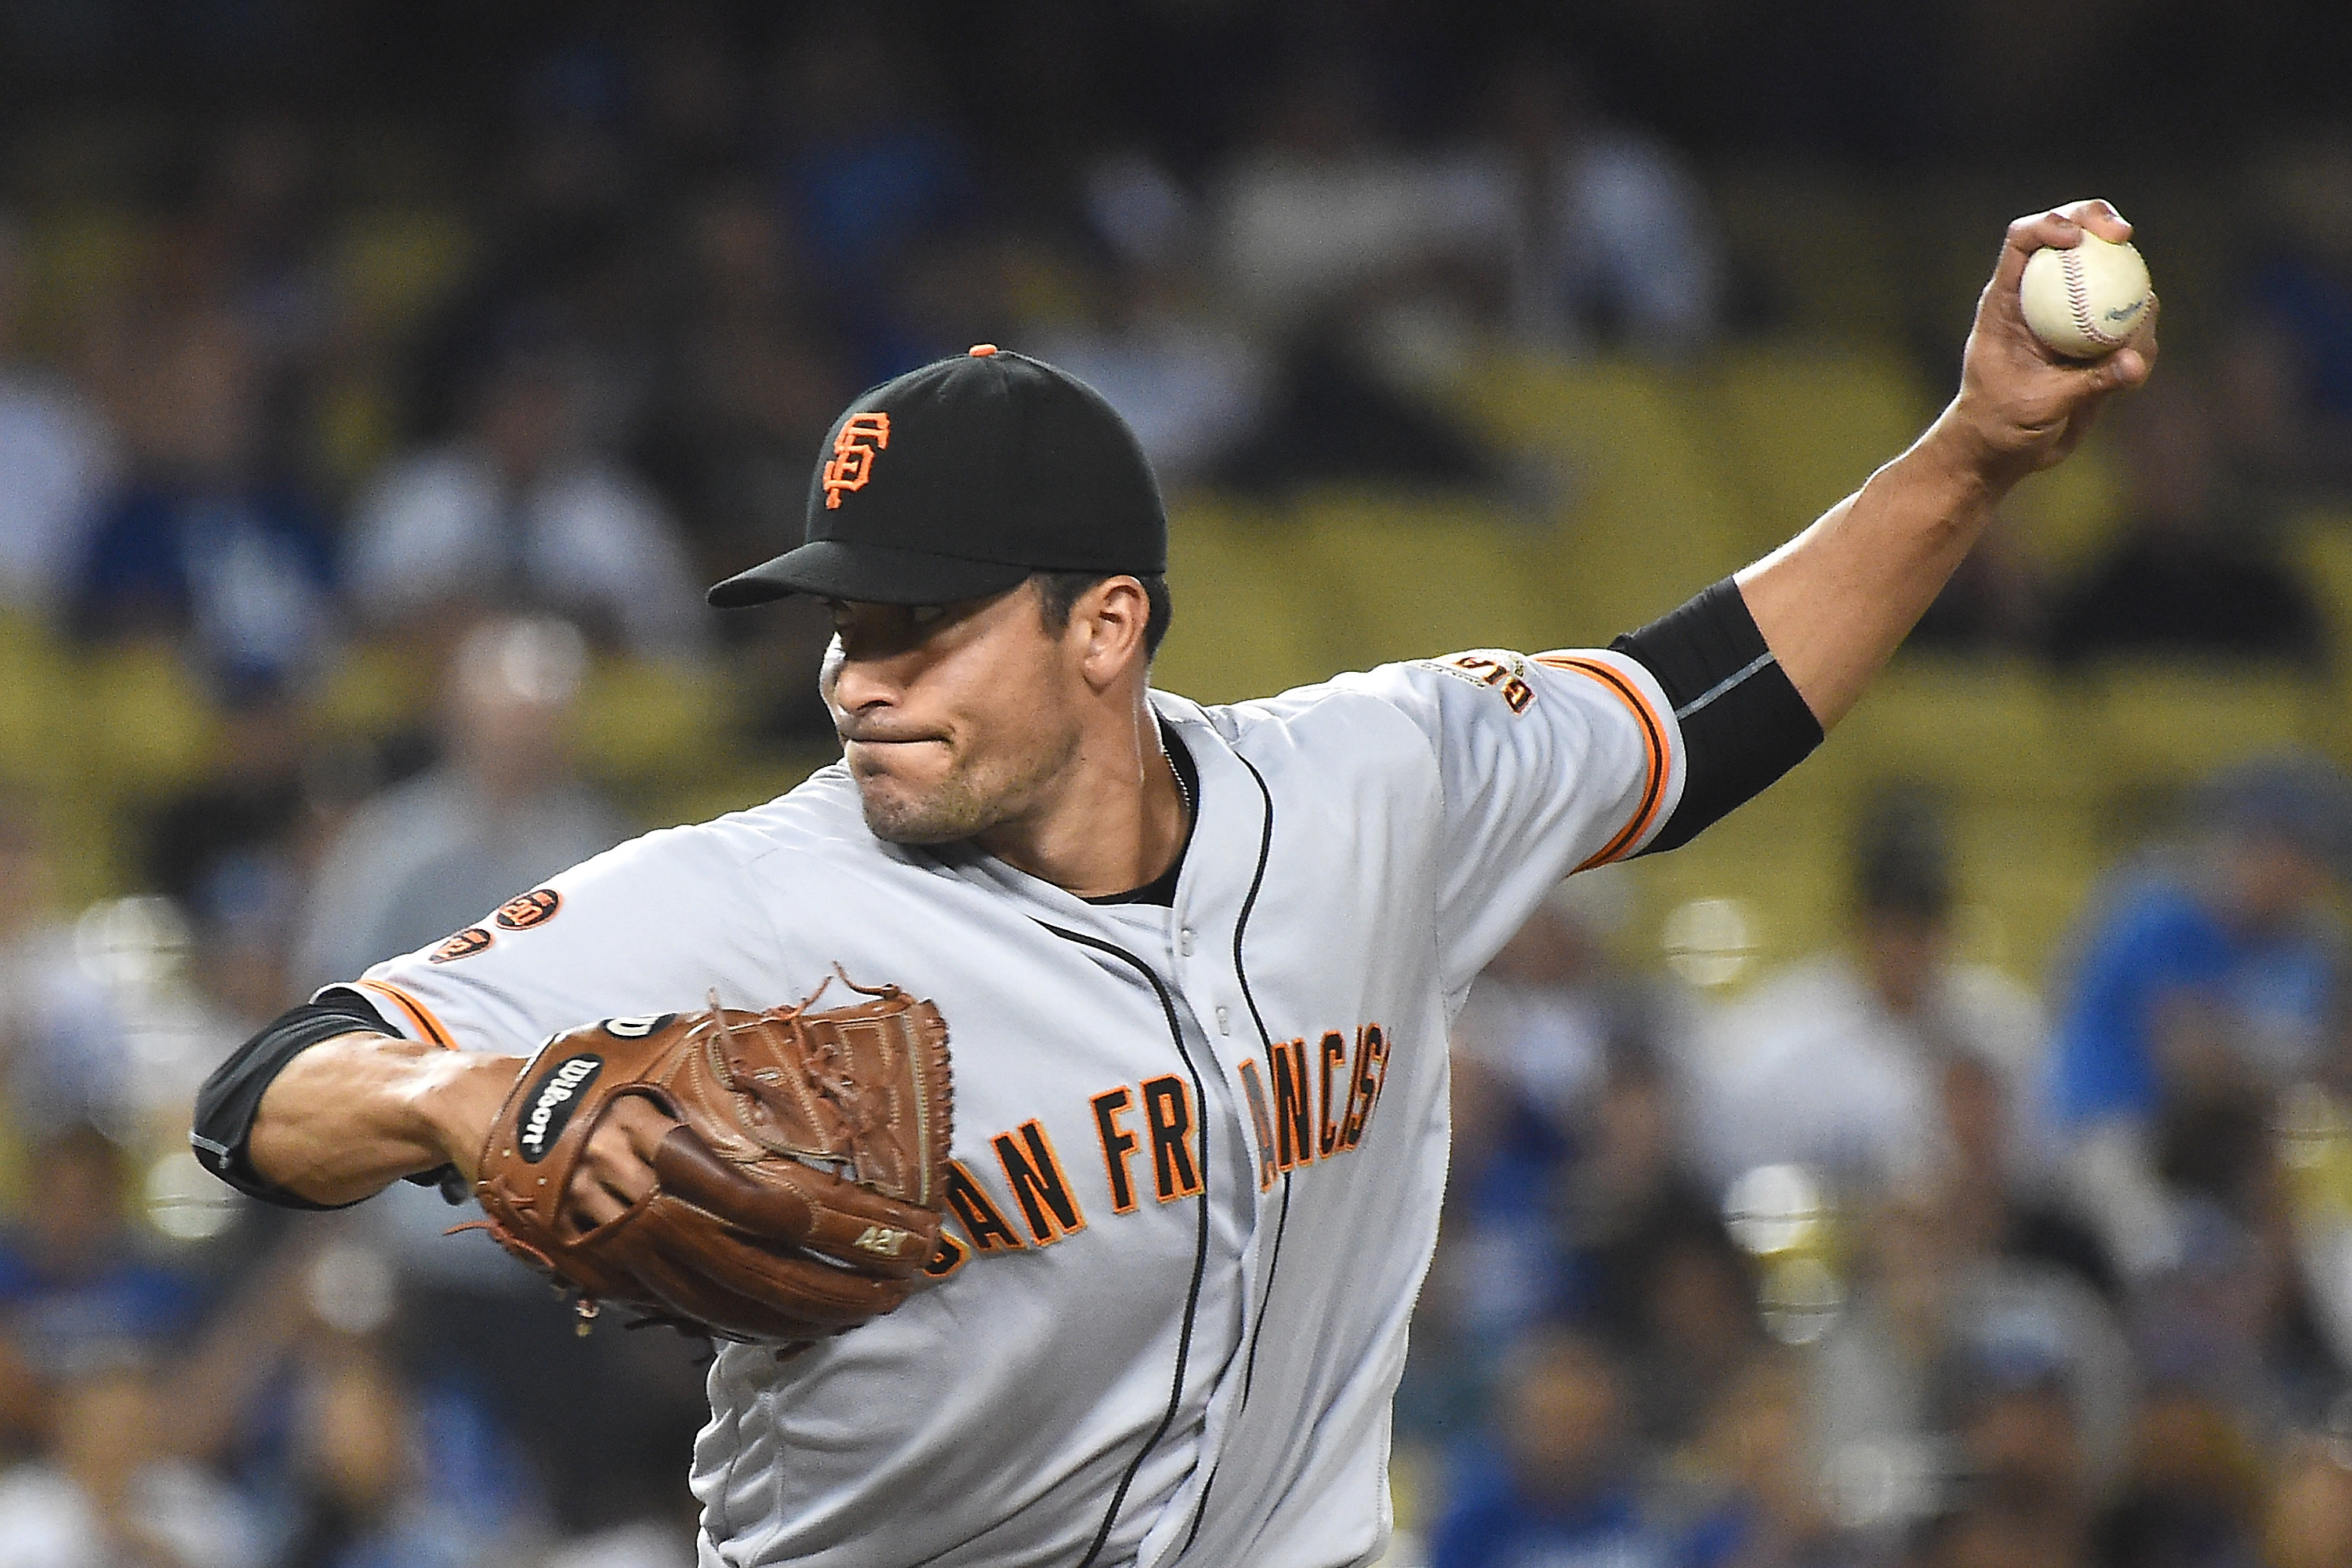 Giants lefty reliever Javier Lopez improving with age – The Mercury News